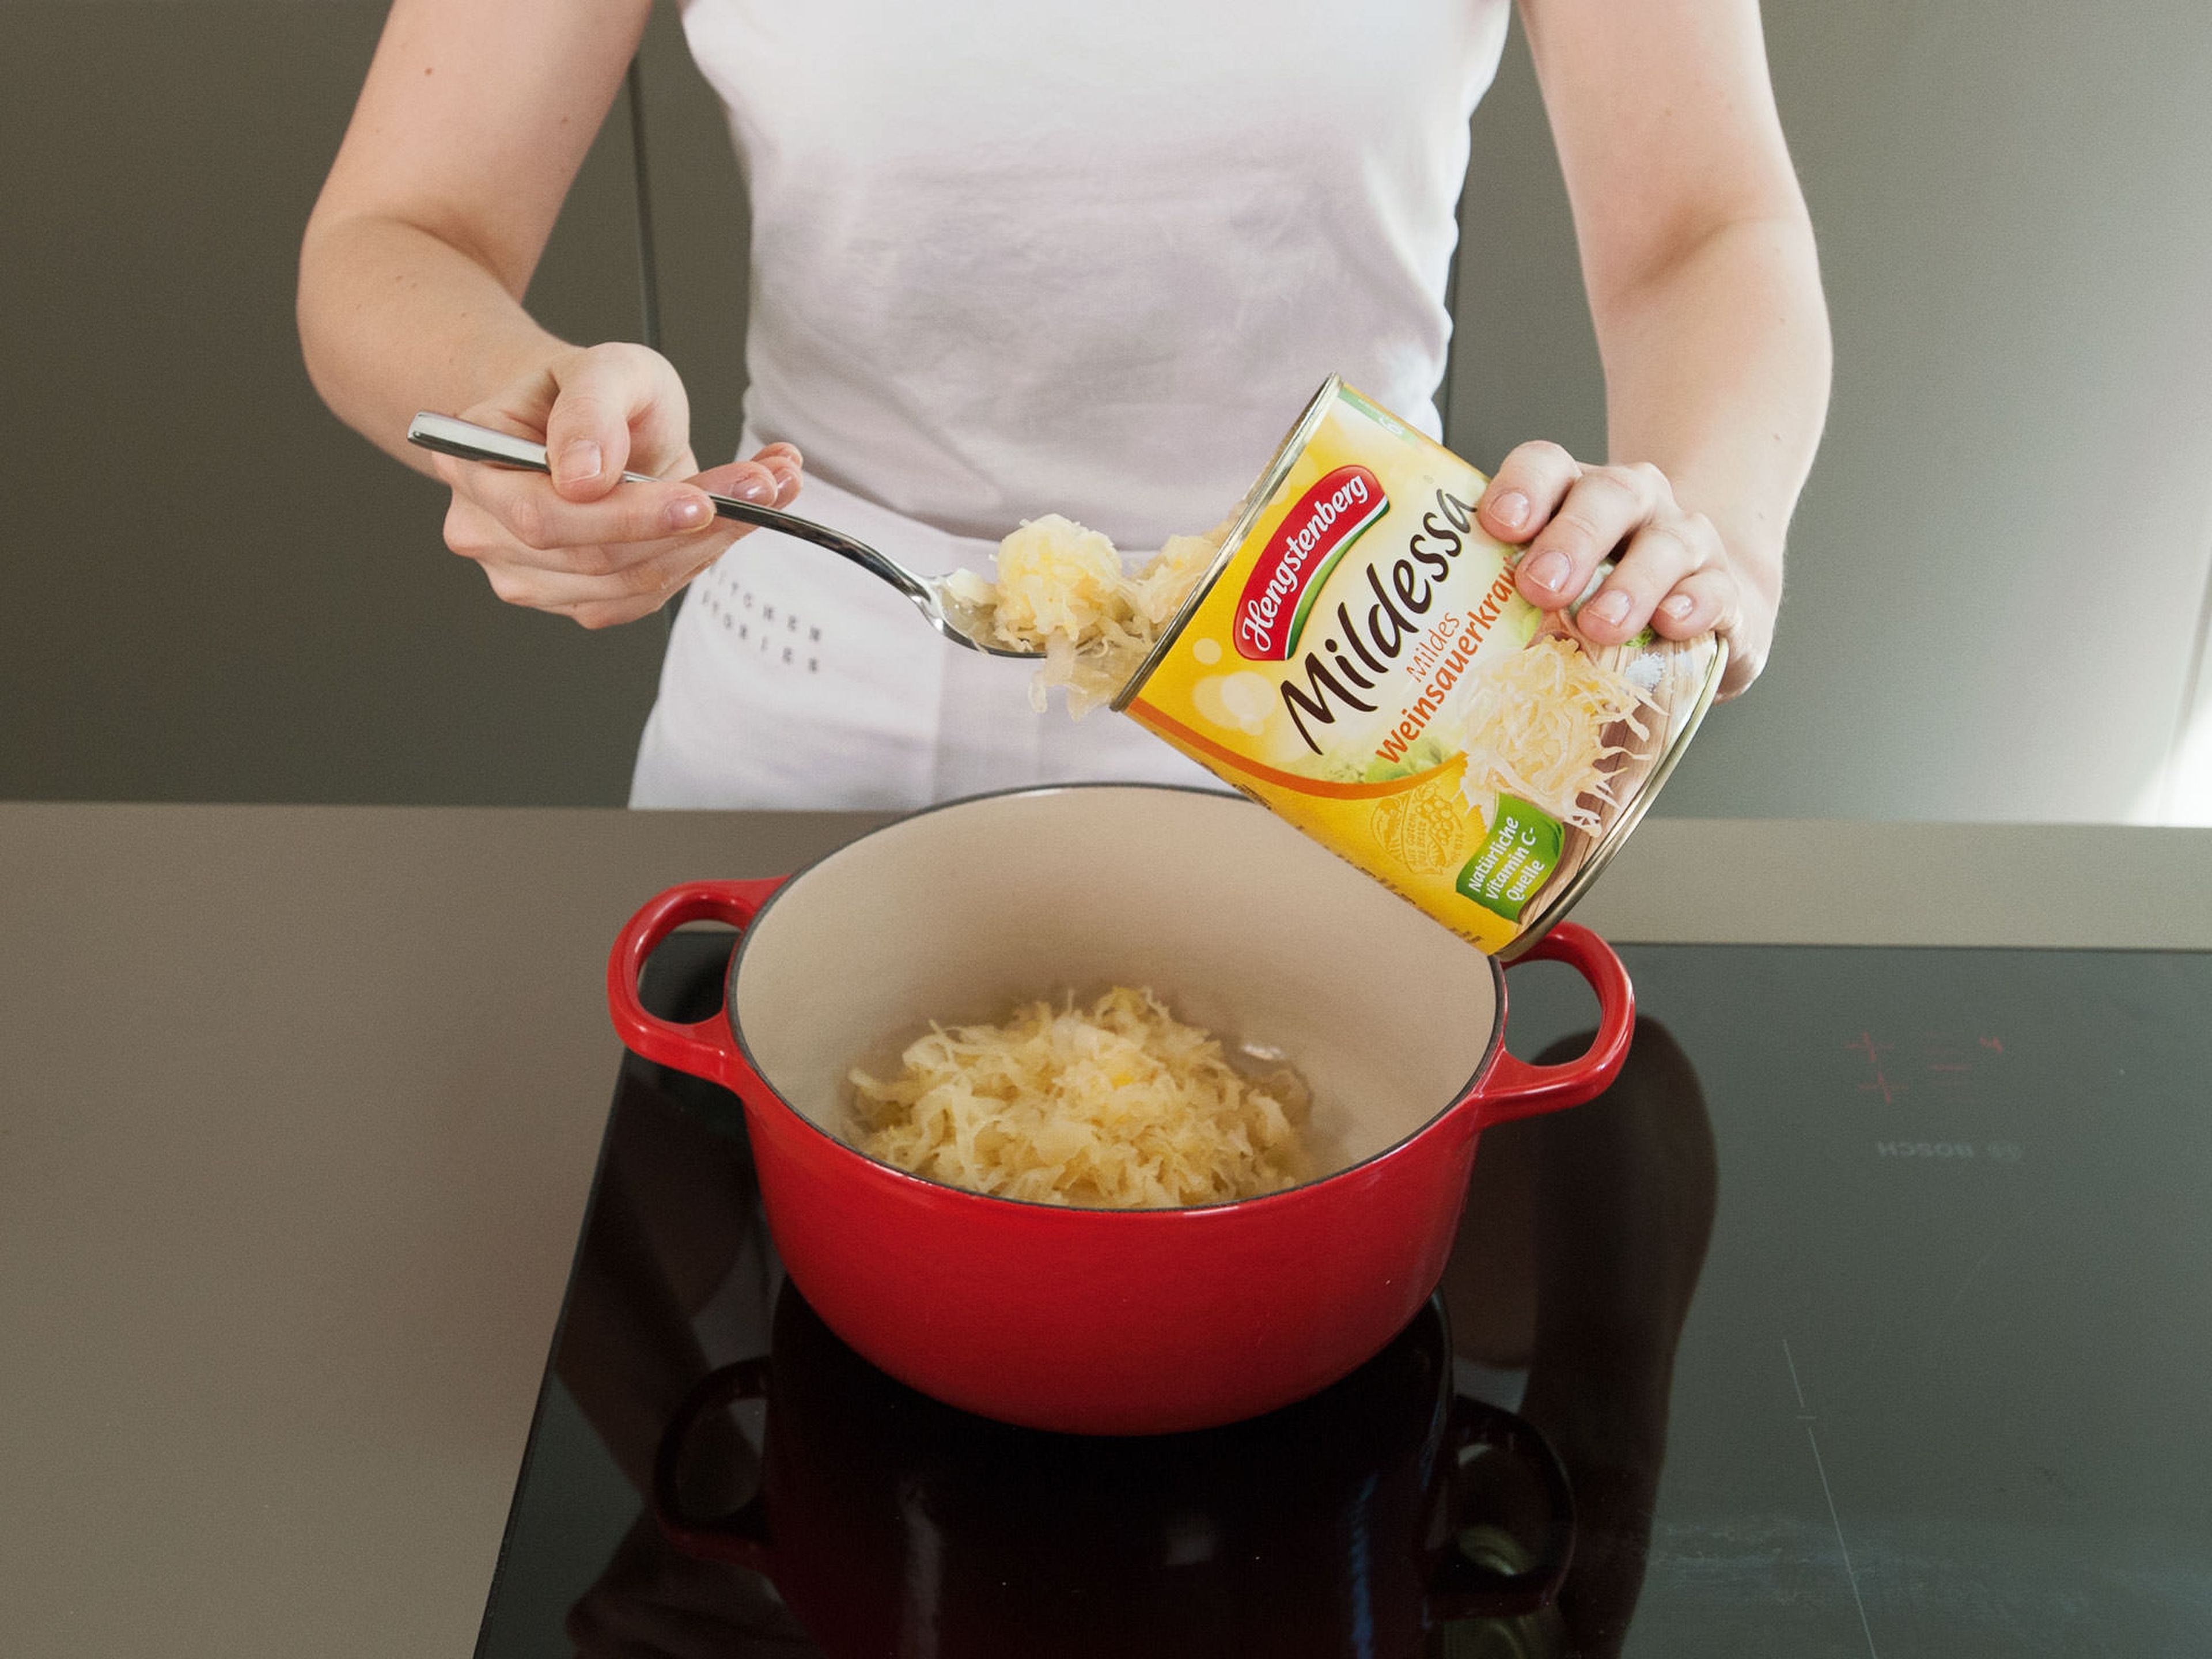 In a small saucepan, melt some of the butter over medium heat, add onion and bacon, and sauté for approx. 3 – 5 min. until bacon is crispy and onions are translucent. Add sauerkraut, stir thoroughly to combine, and cook for another 2 – 3 min.